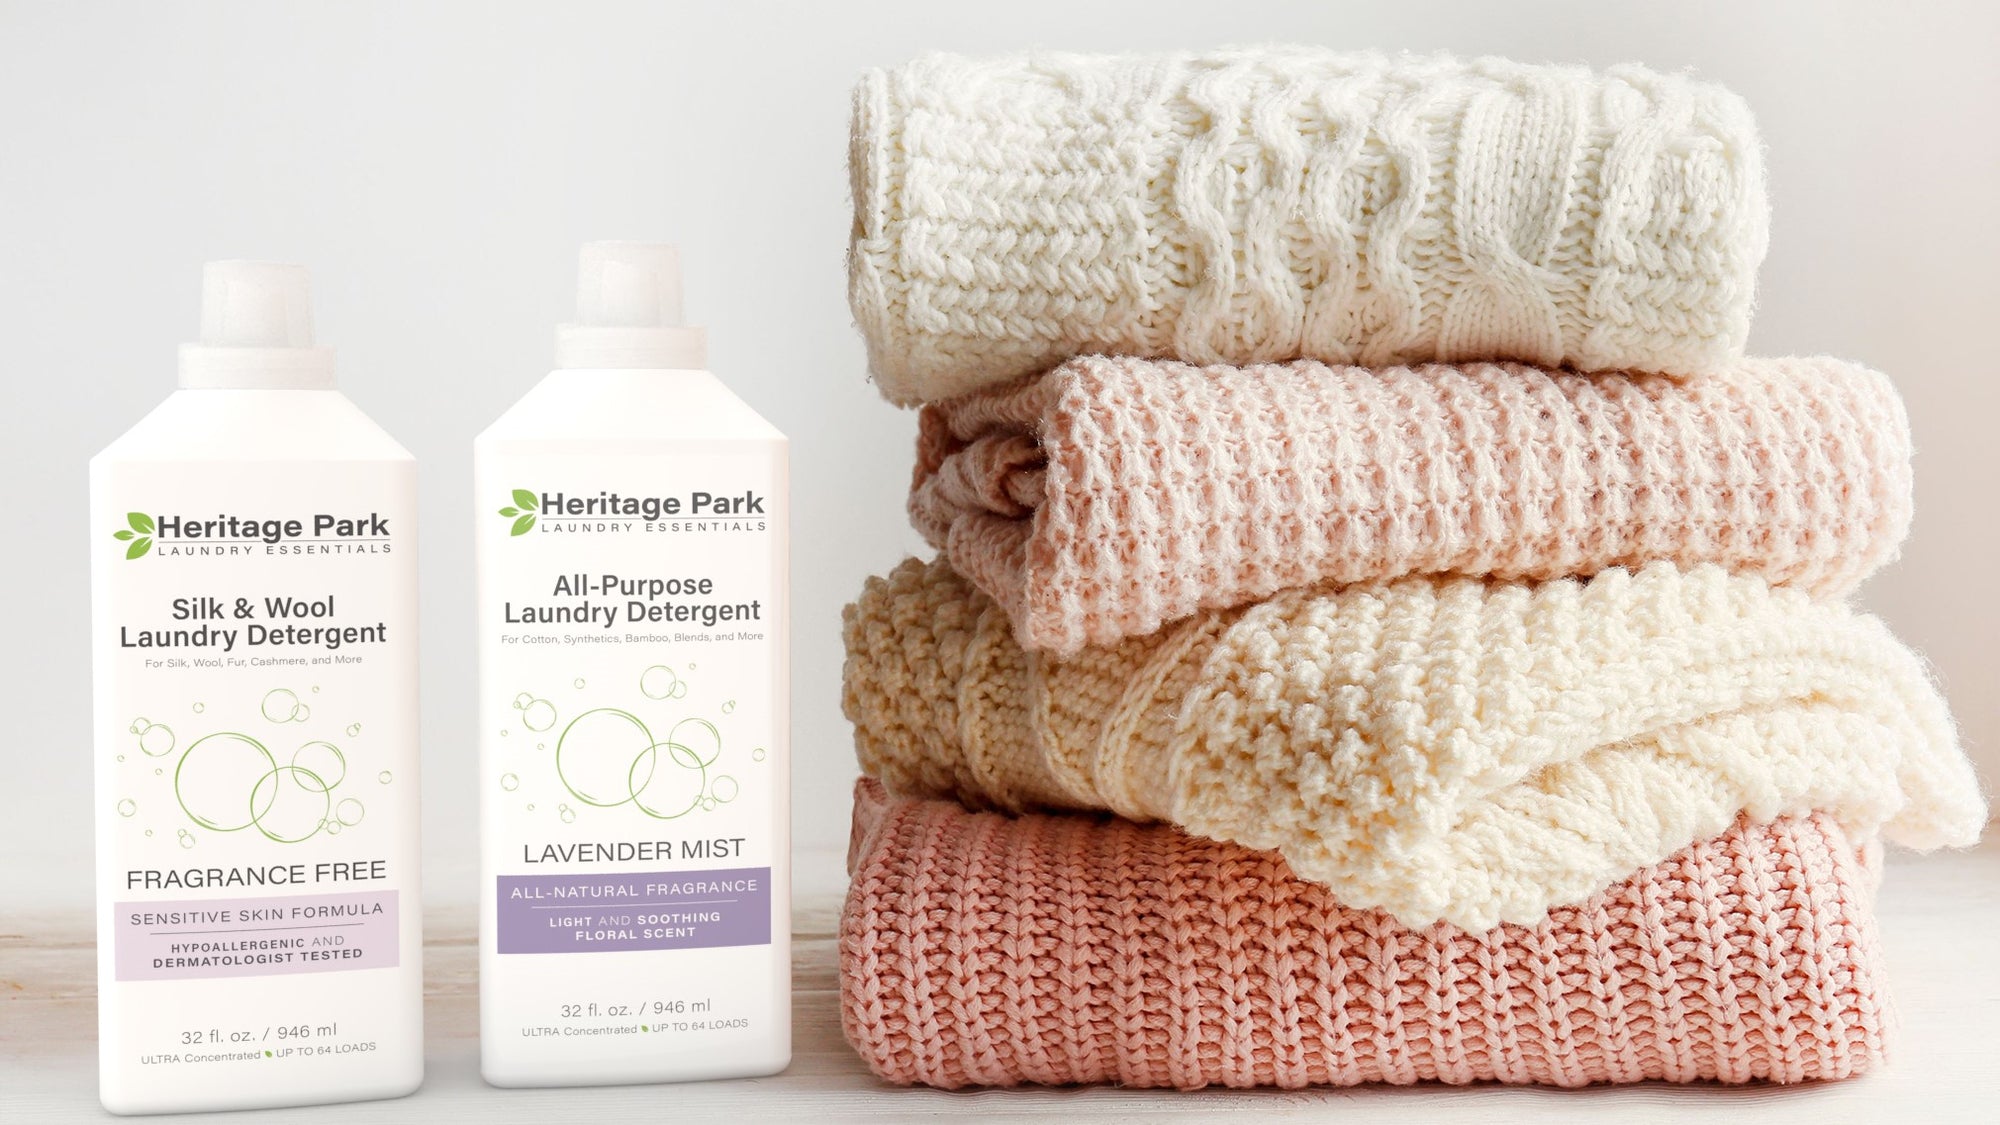 How to Wash Your Silk Lingerie (Without Ruining It)! - Heritage Park  Laundry Essentials